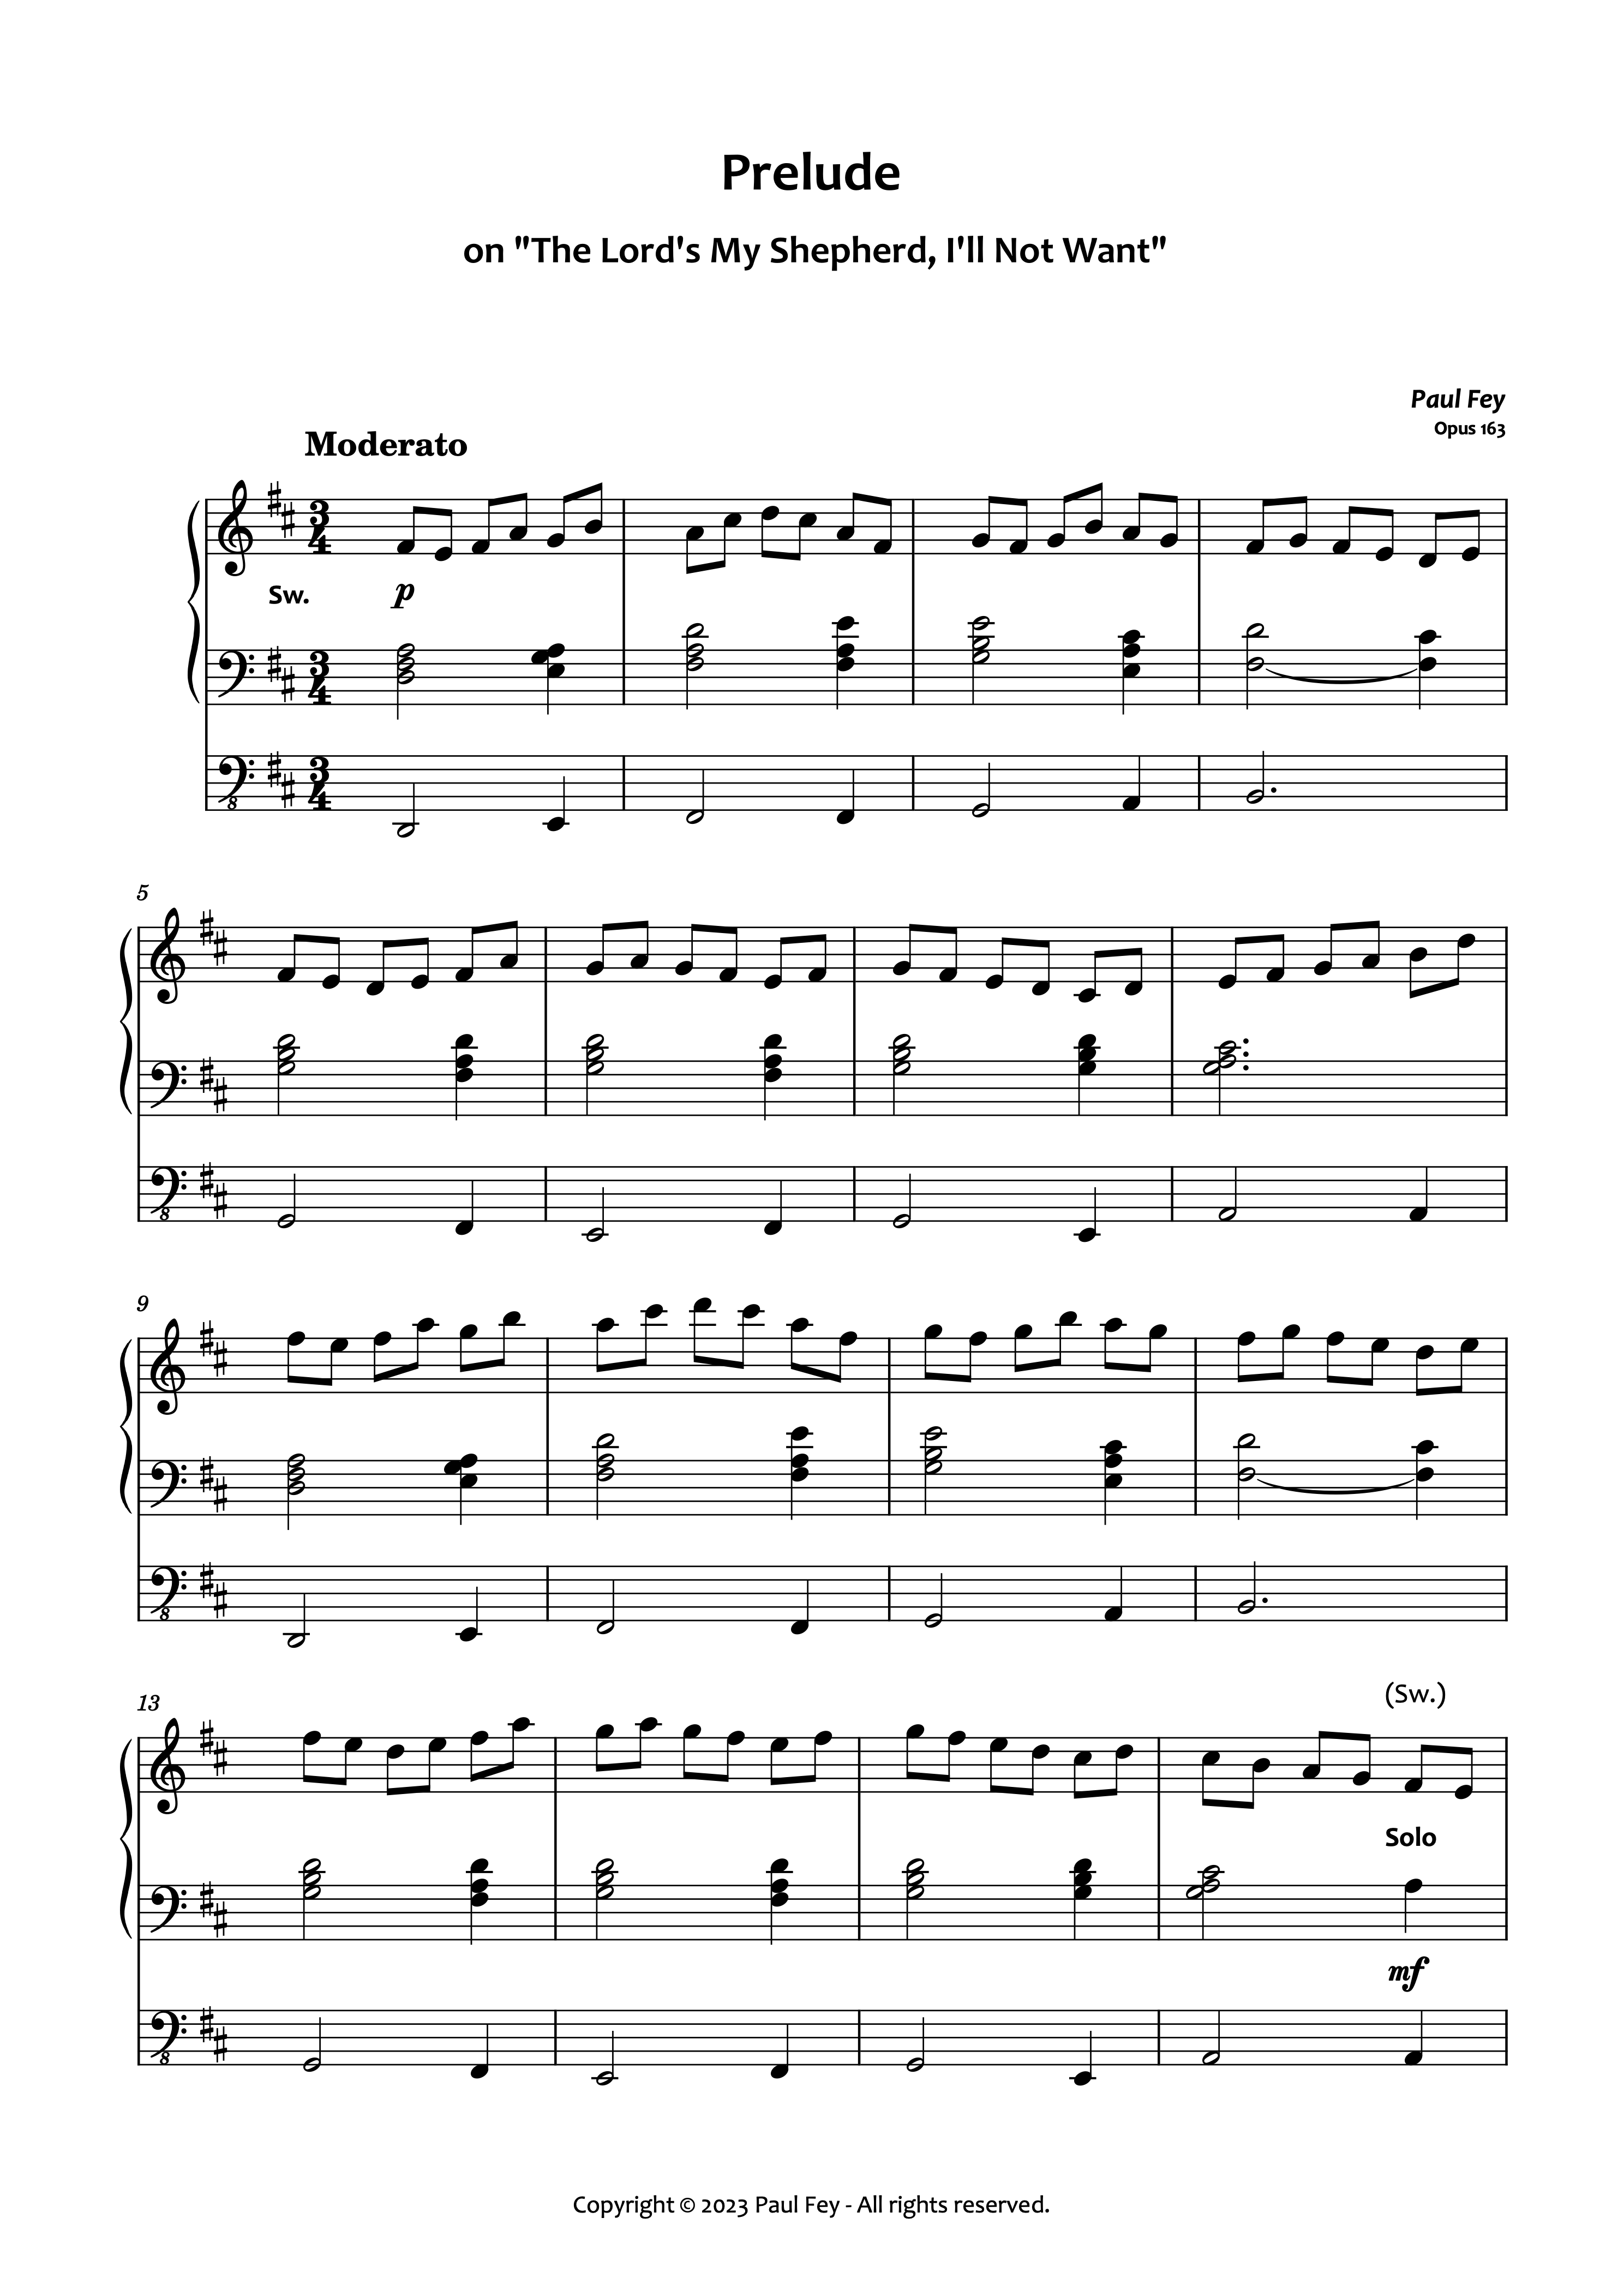 Prelude on 'The Lord's My Shepherd' (Sheet Music) - Music for Organ PDF Download